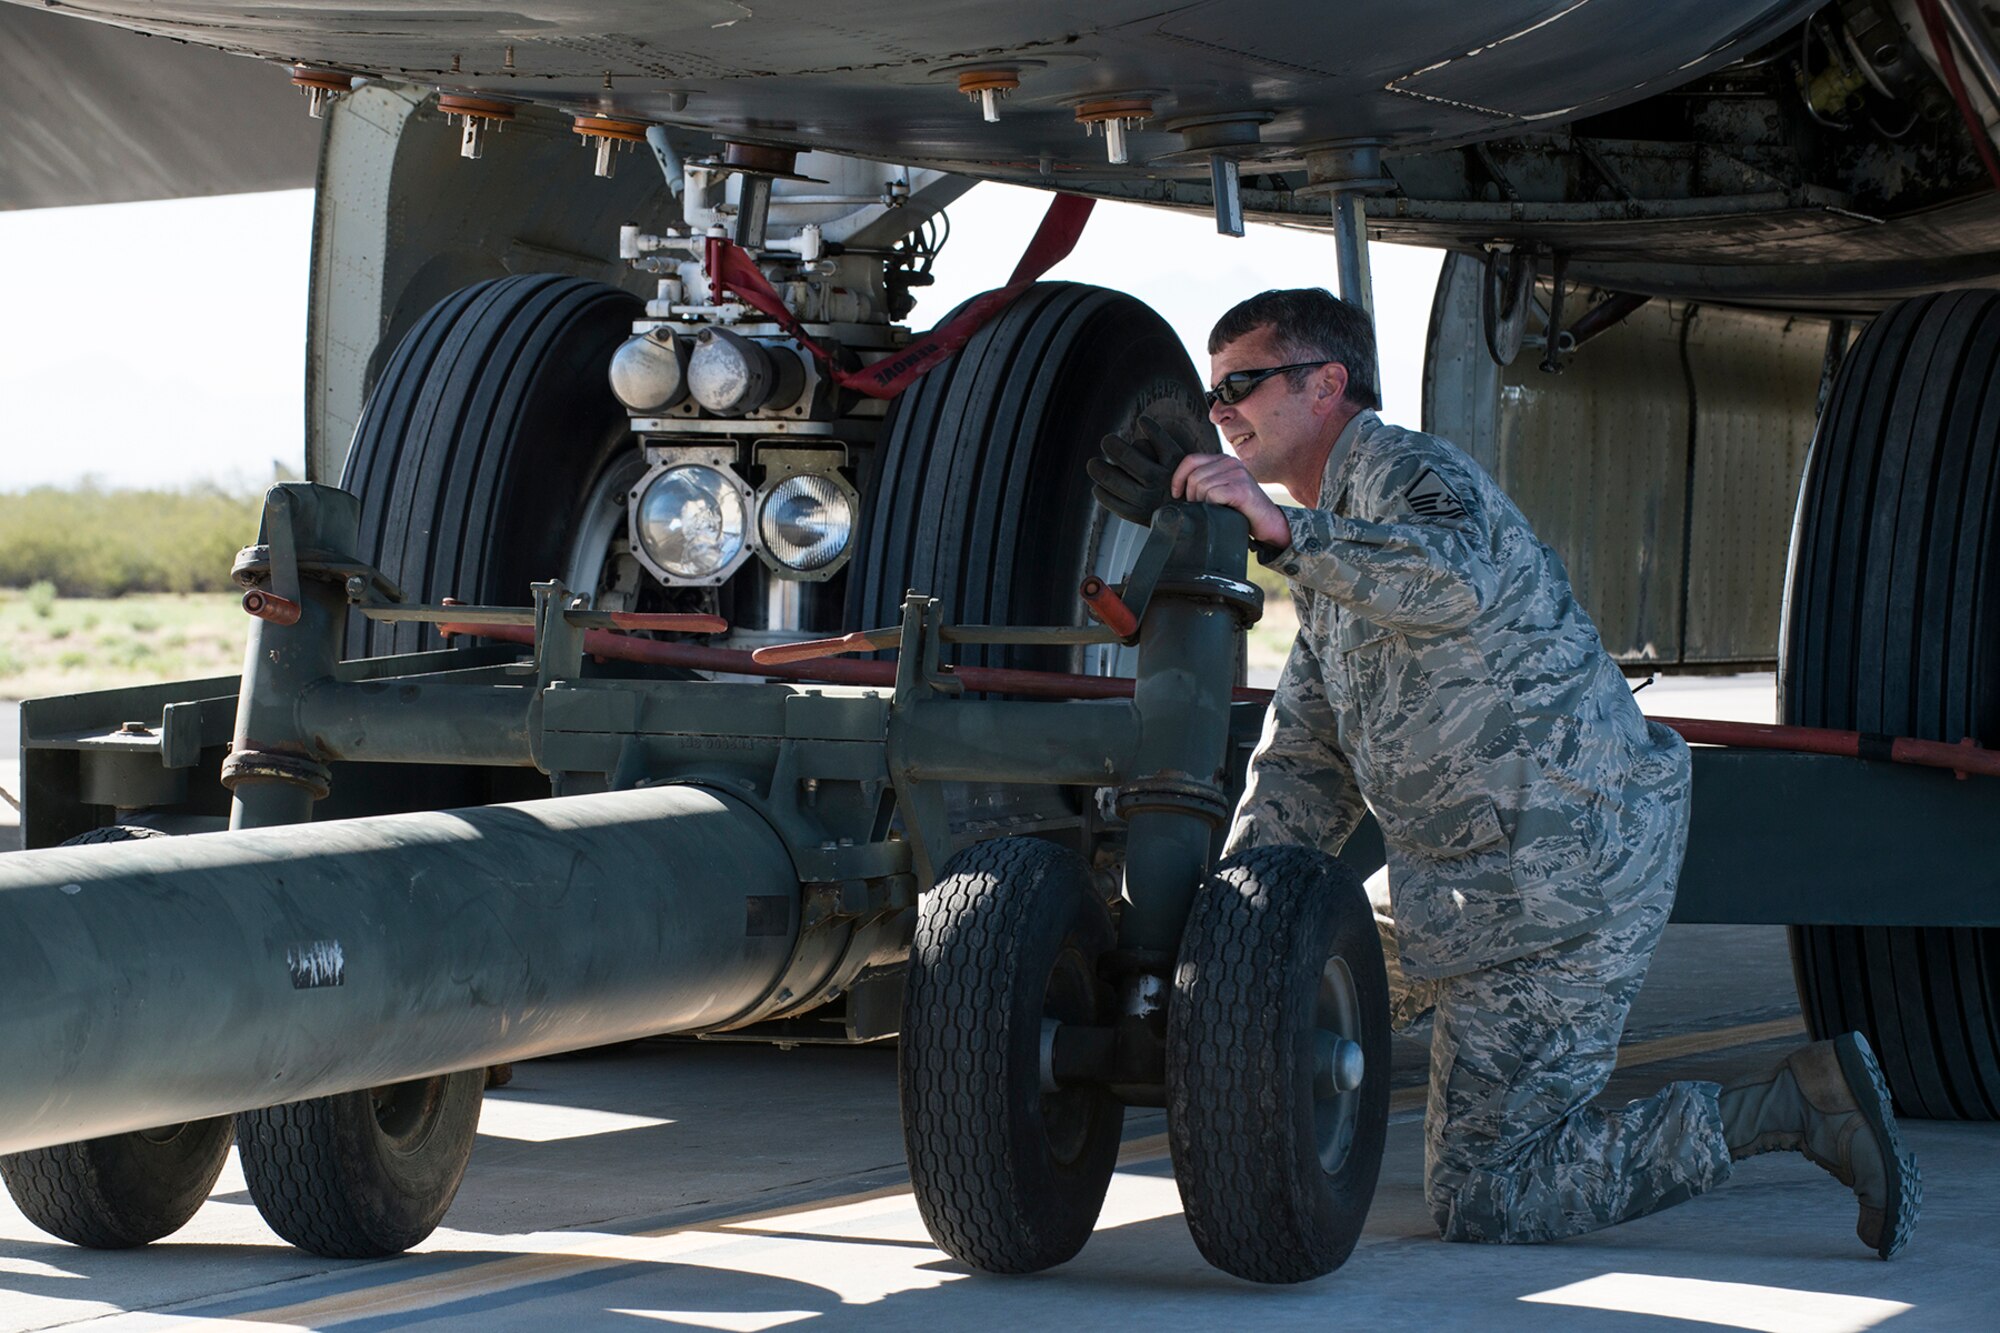 U.S. Air Force Master Sgt. Steve Vance, 307th Aircraft Maintenance Squadron crew chief, disconnects a tow bar from a B-52H Stratofortress after towing it to a parking spot on the flight line at Davis-Monthan (DM) Air Force Base, Ariz., Feb. 11, 2015. The aircraft was decommissioned in 2008 and sent to the "Boneyard" at the 309th Aerospace Maintenance and Regeneration Group at DM, but is now being restored and is expected to return to active service in 2016. (U.S. Air Force photo by Master Sgt. Greg Steele/Released)